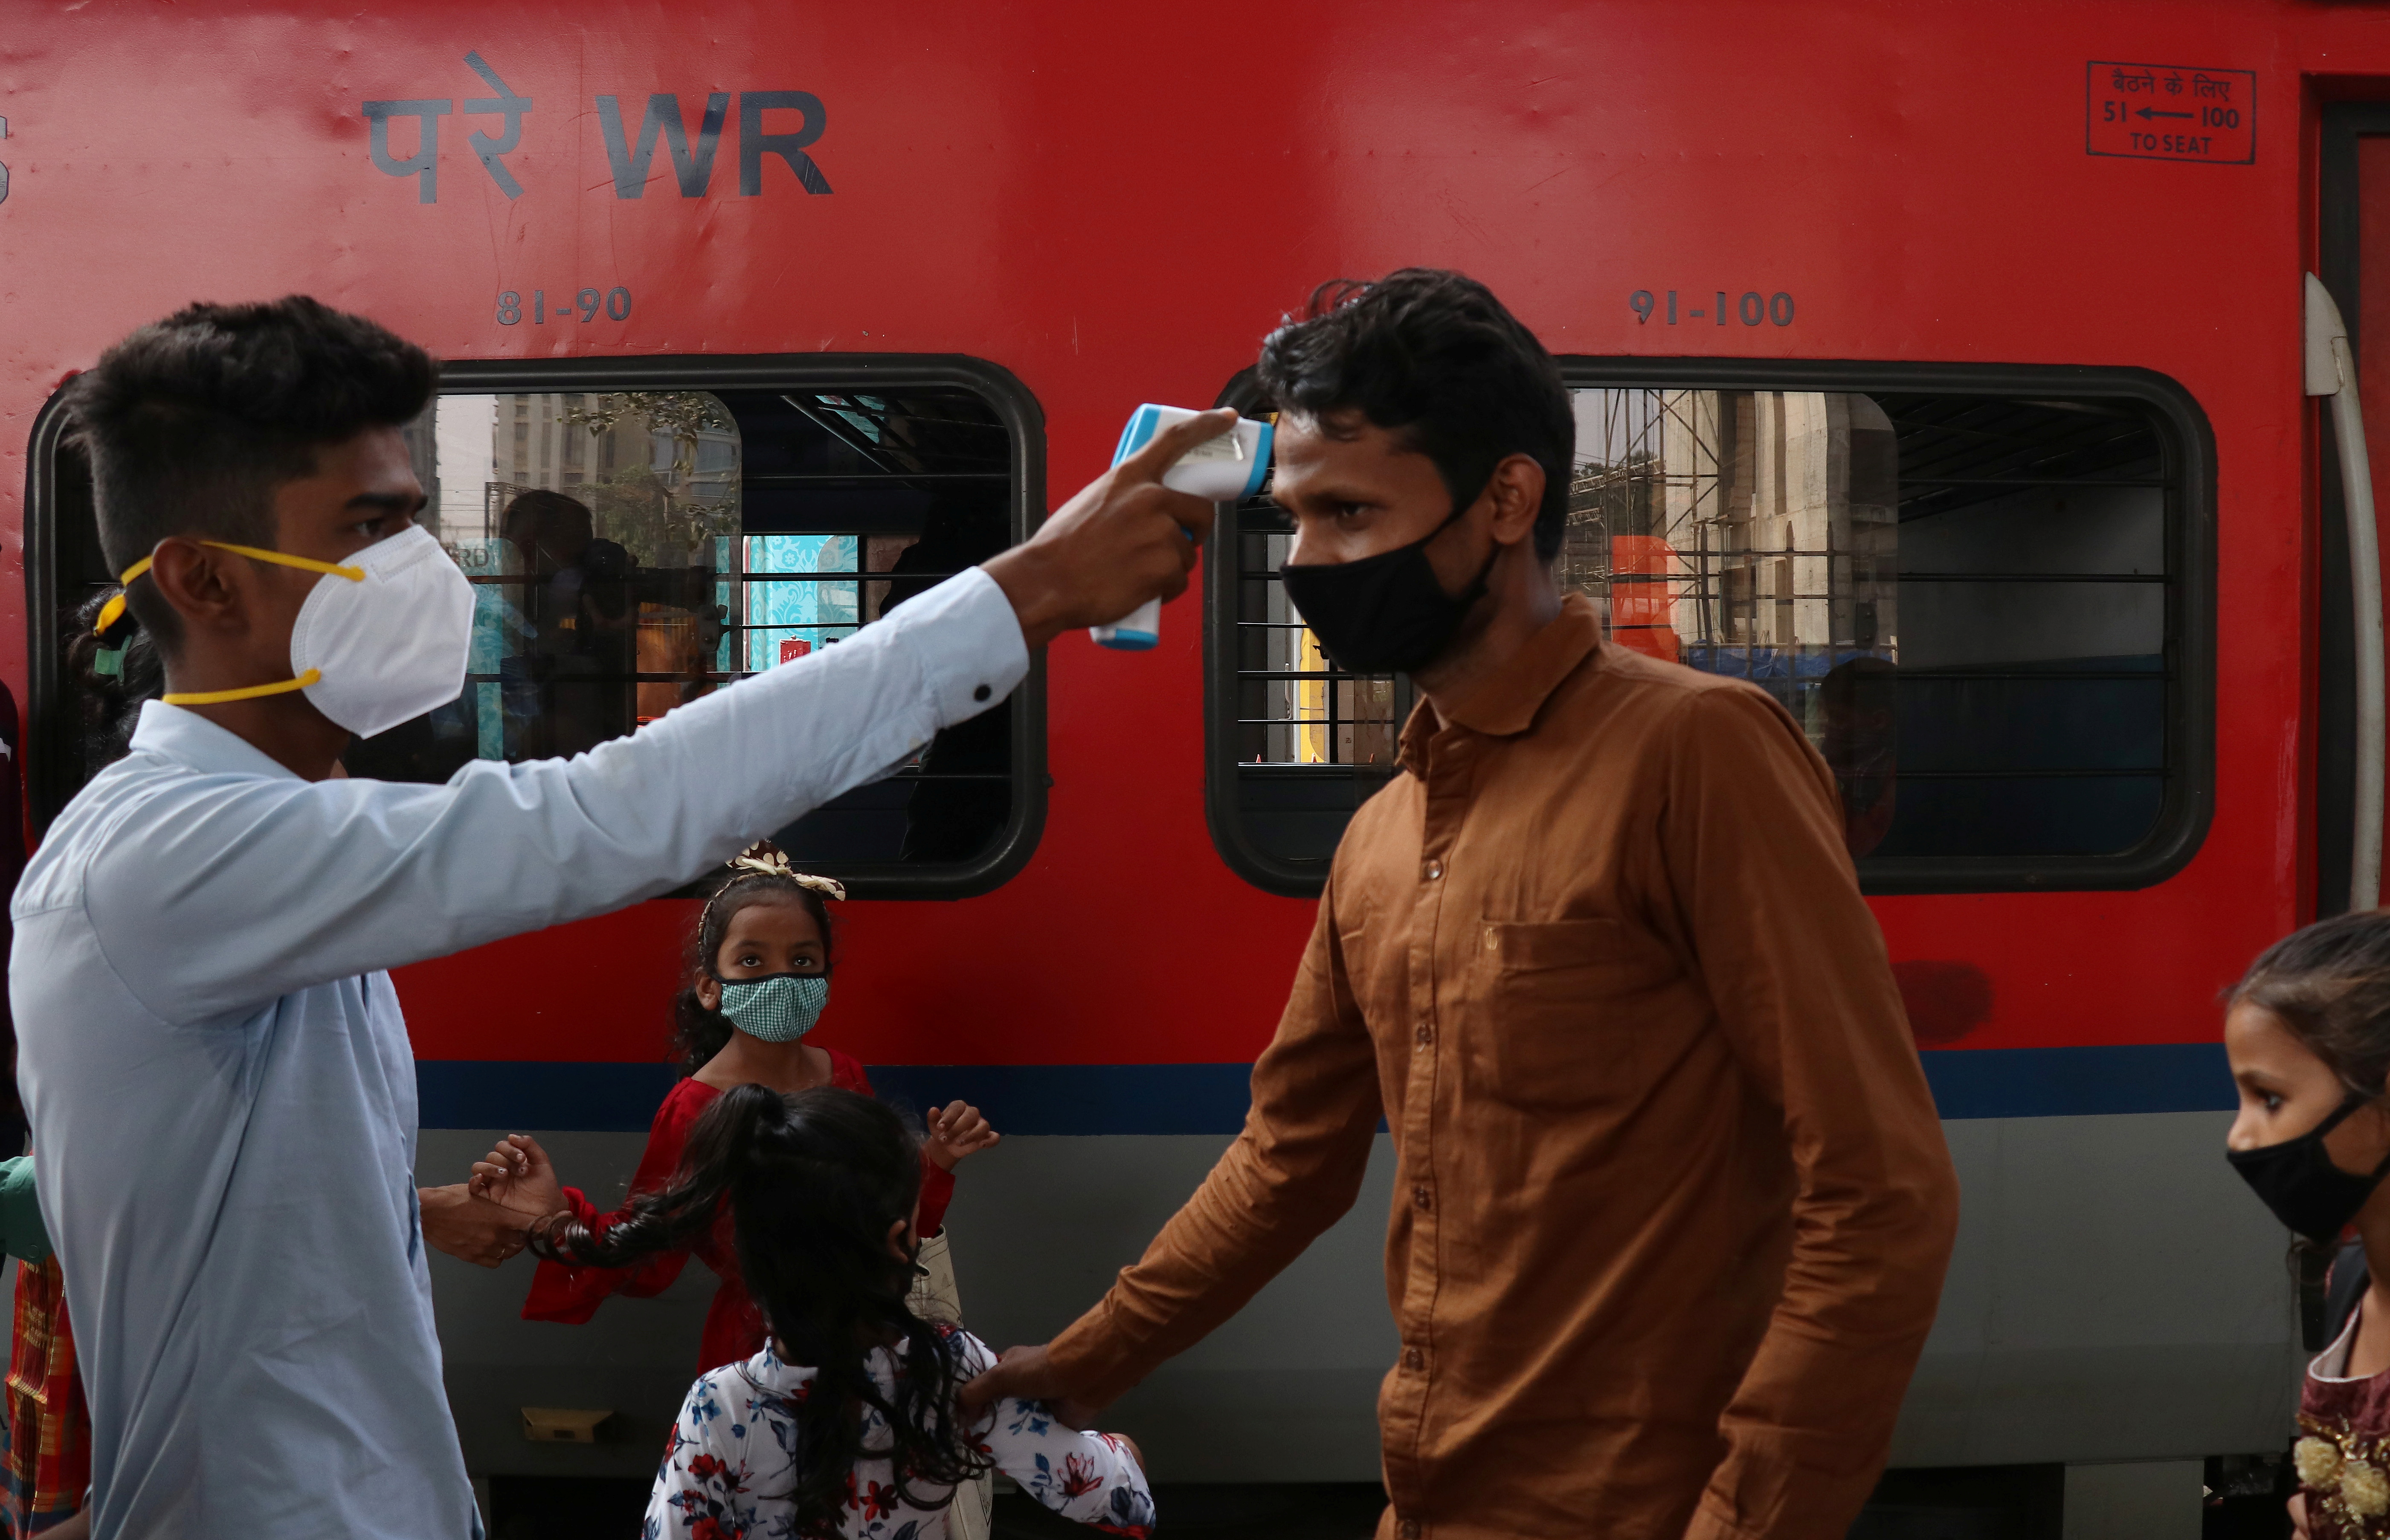 Rapid antigen testing drive for the COVID-19 at railway station platform in Mumbai